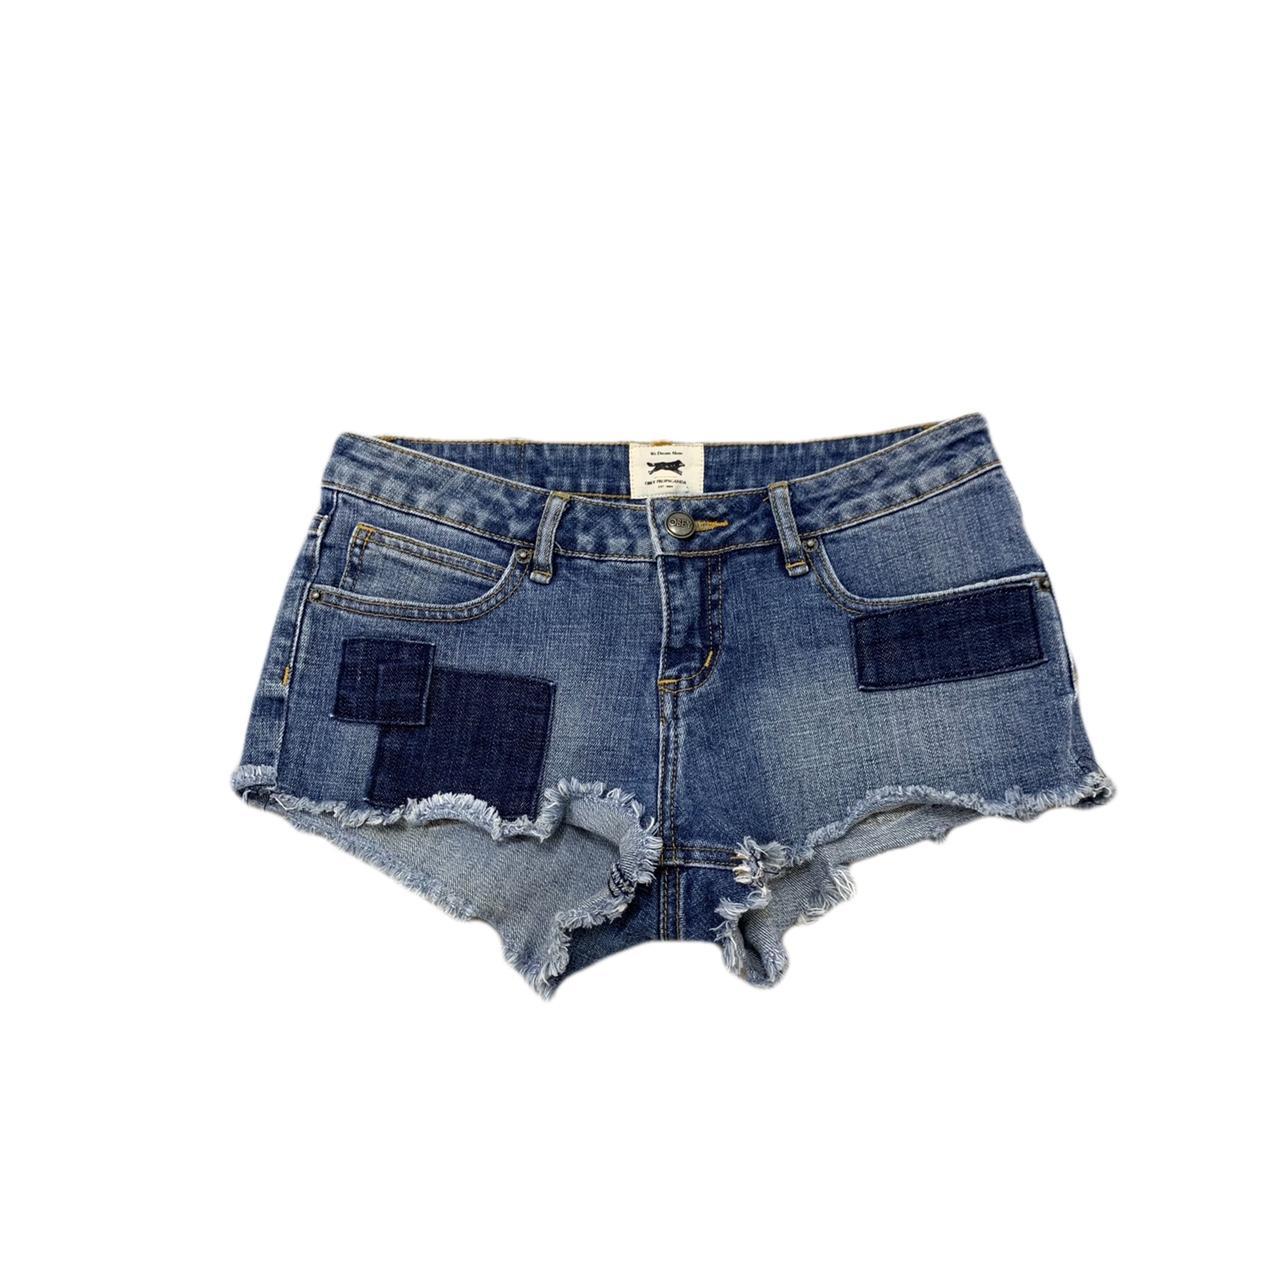 Obey Women's Navy and Blue Shorts